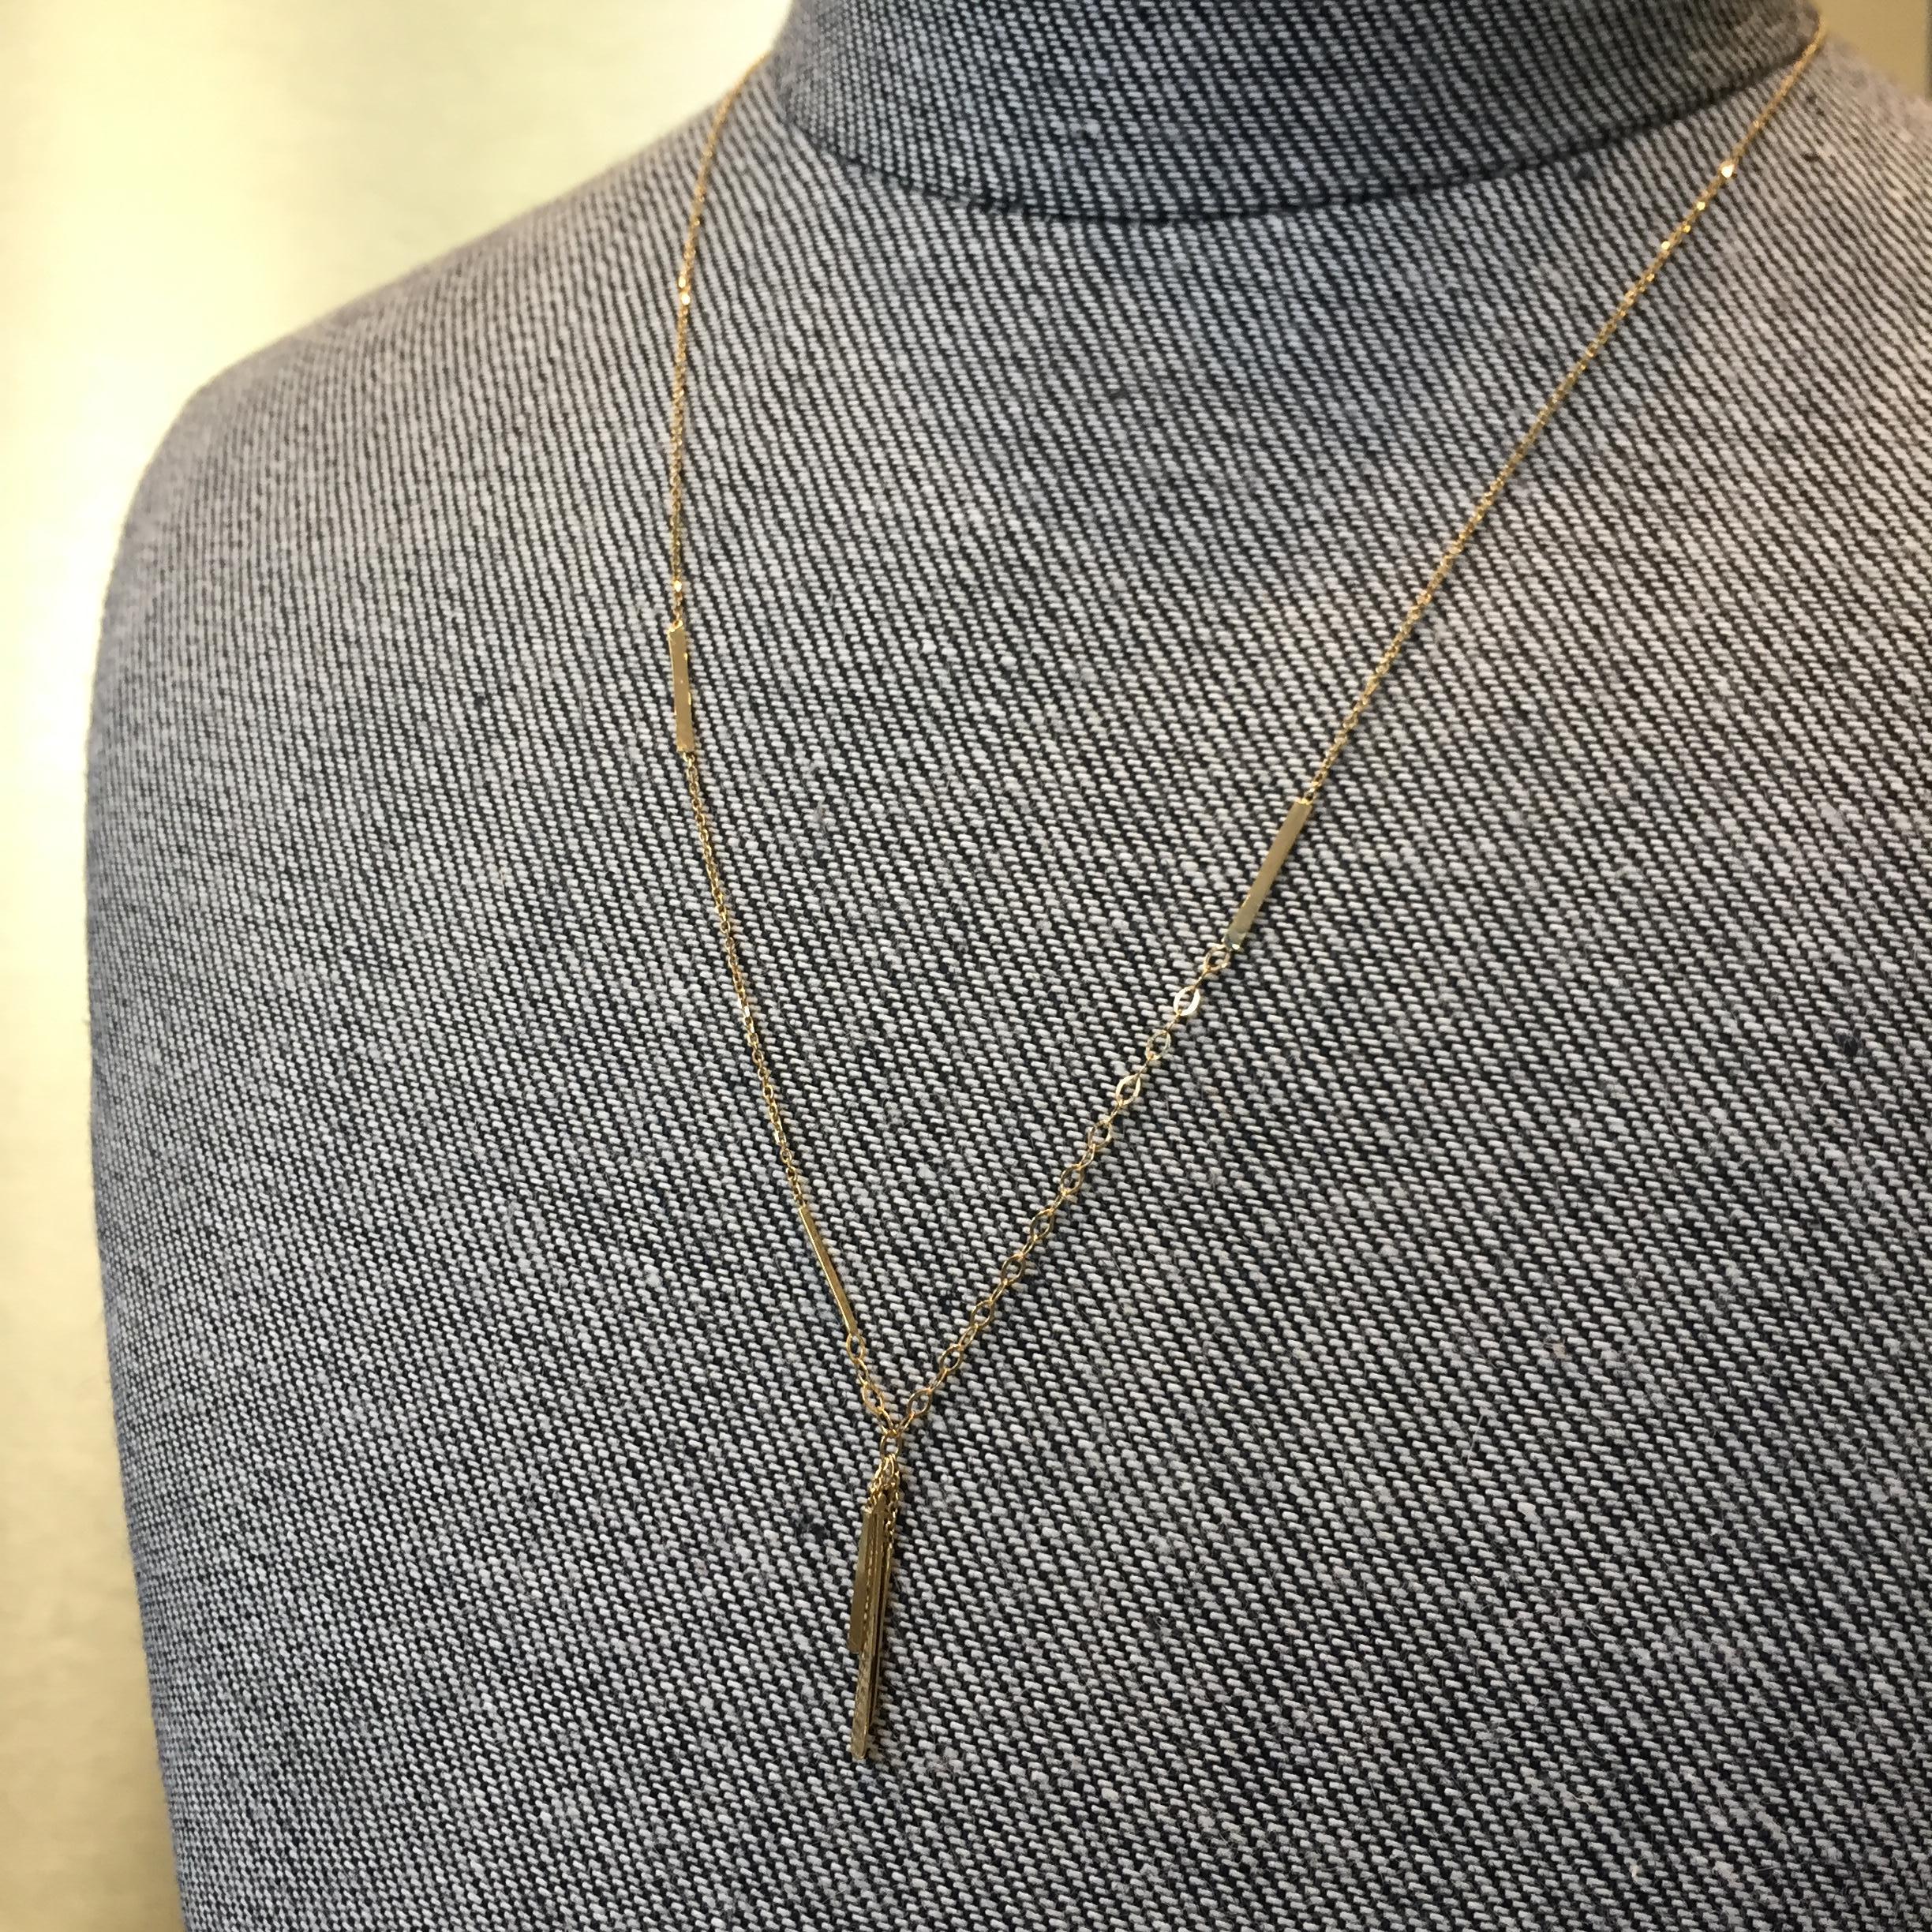 Contemporary Sweet Pea Sycamore 18k Yellow Gold Necklace With Hanging Bar Details For Sale